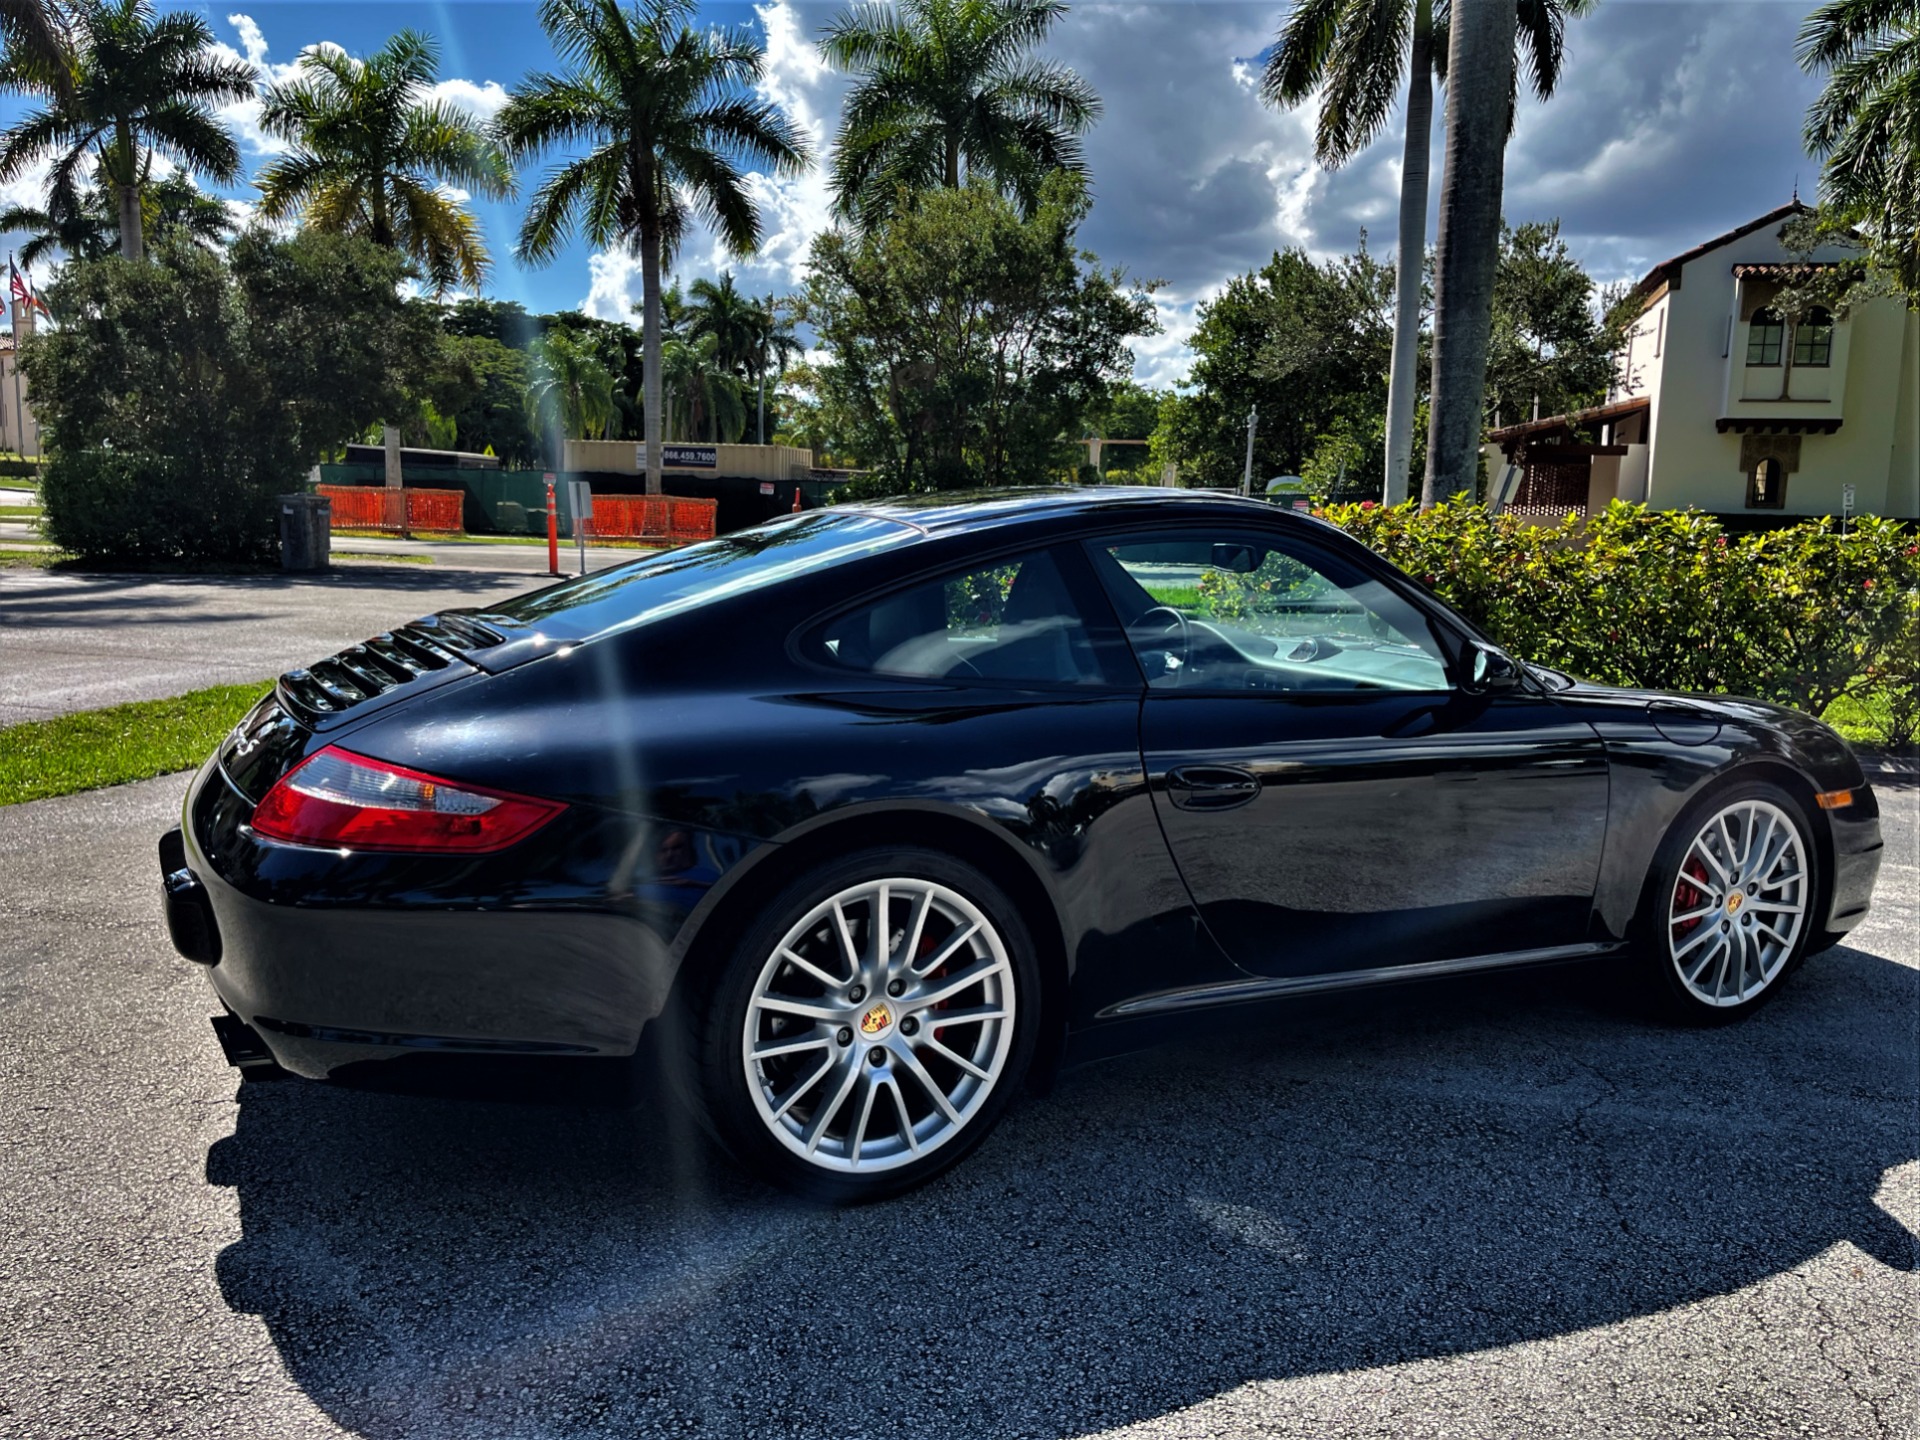 Used 2007 Porsche 911 Carrera S for sale Sold at The Gables Sports Cars in Miami FL 33146 4